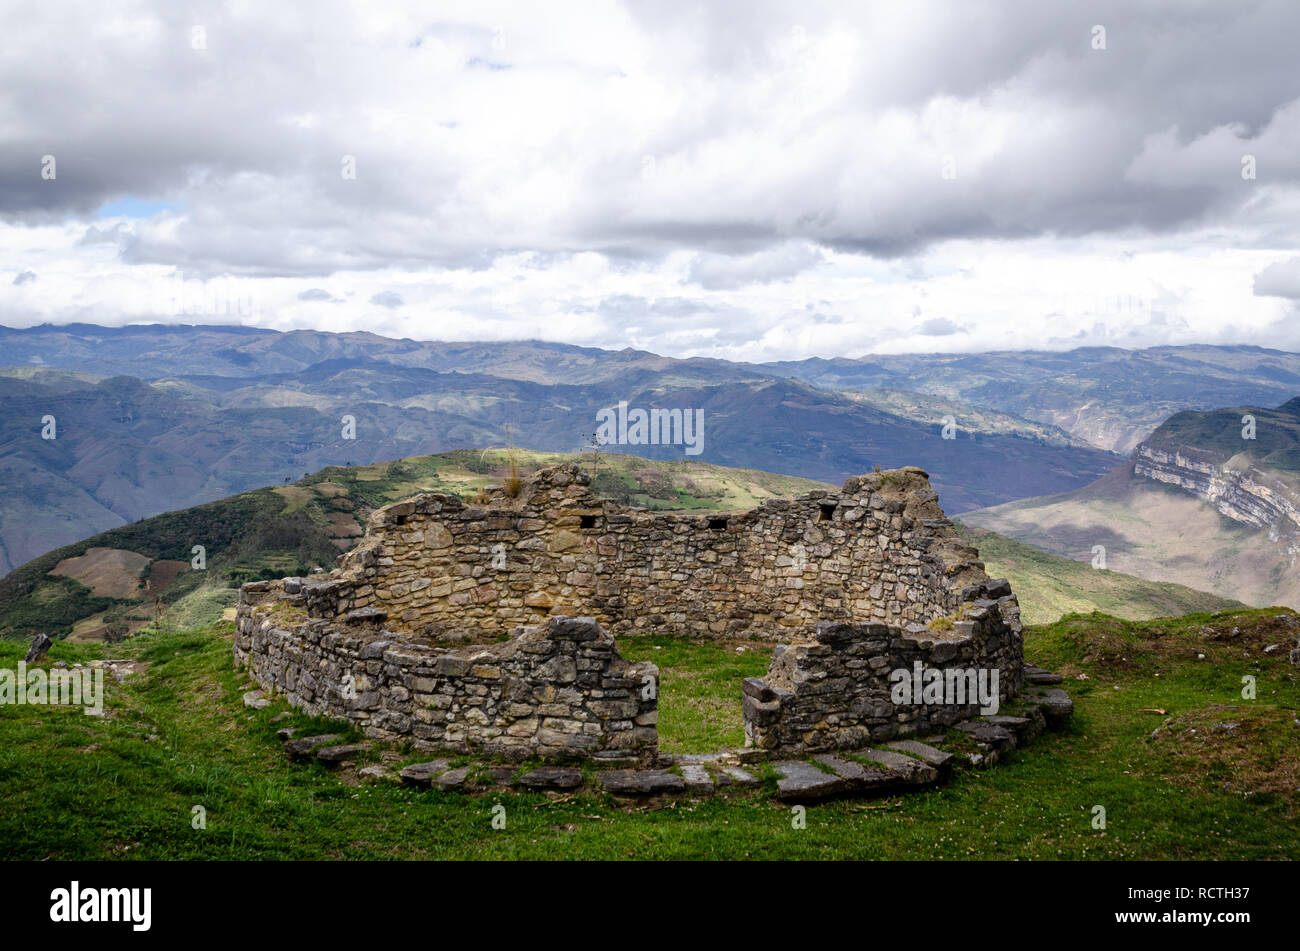 Ruins of the Kuelap fortress situated at 3000 meters above sea level in the northwestern Andes, Amazonas, Peru. Kuelap is pre-Inca archaeological site. Stock Photo